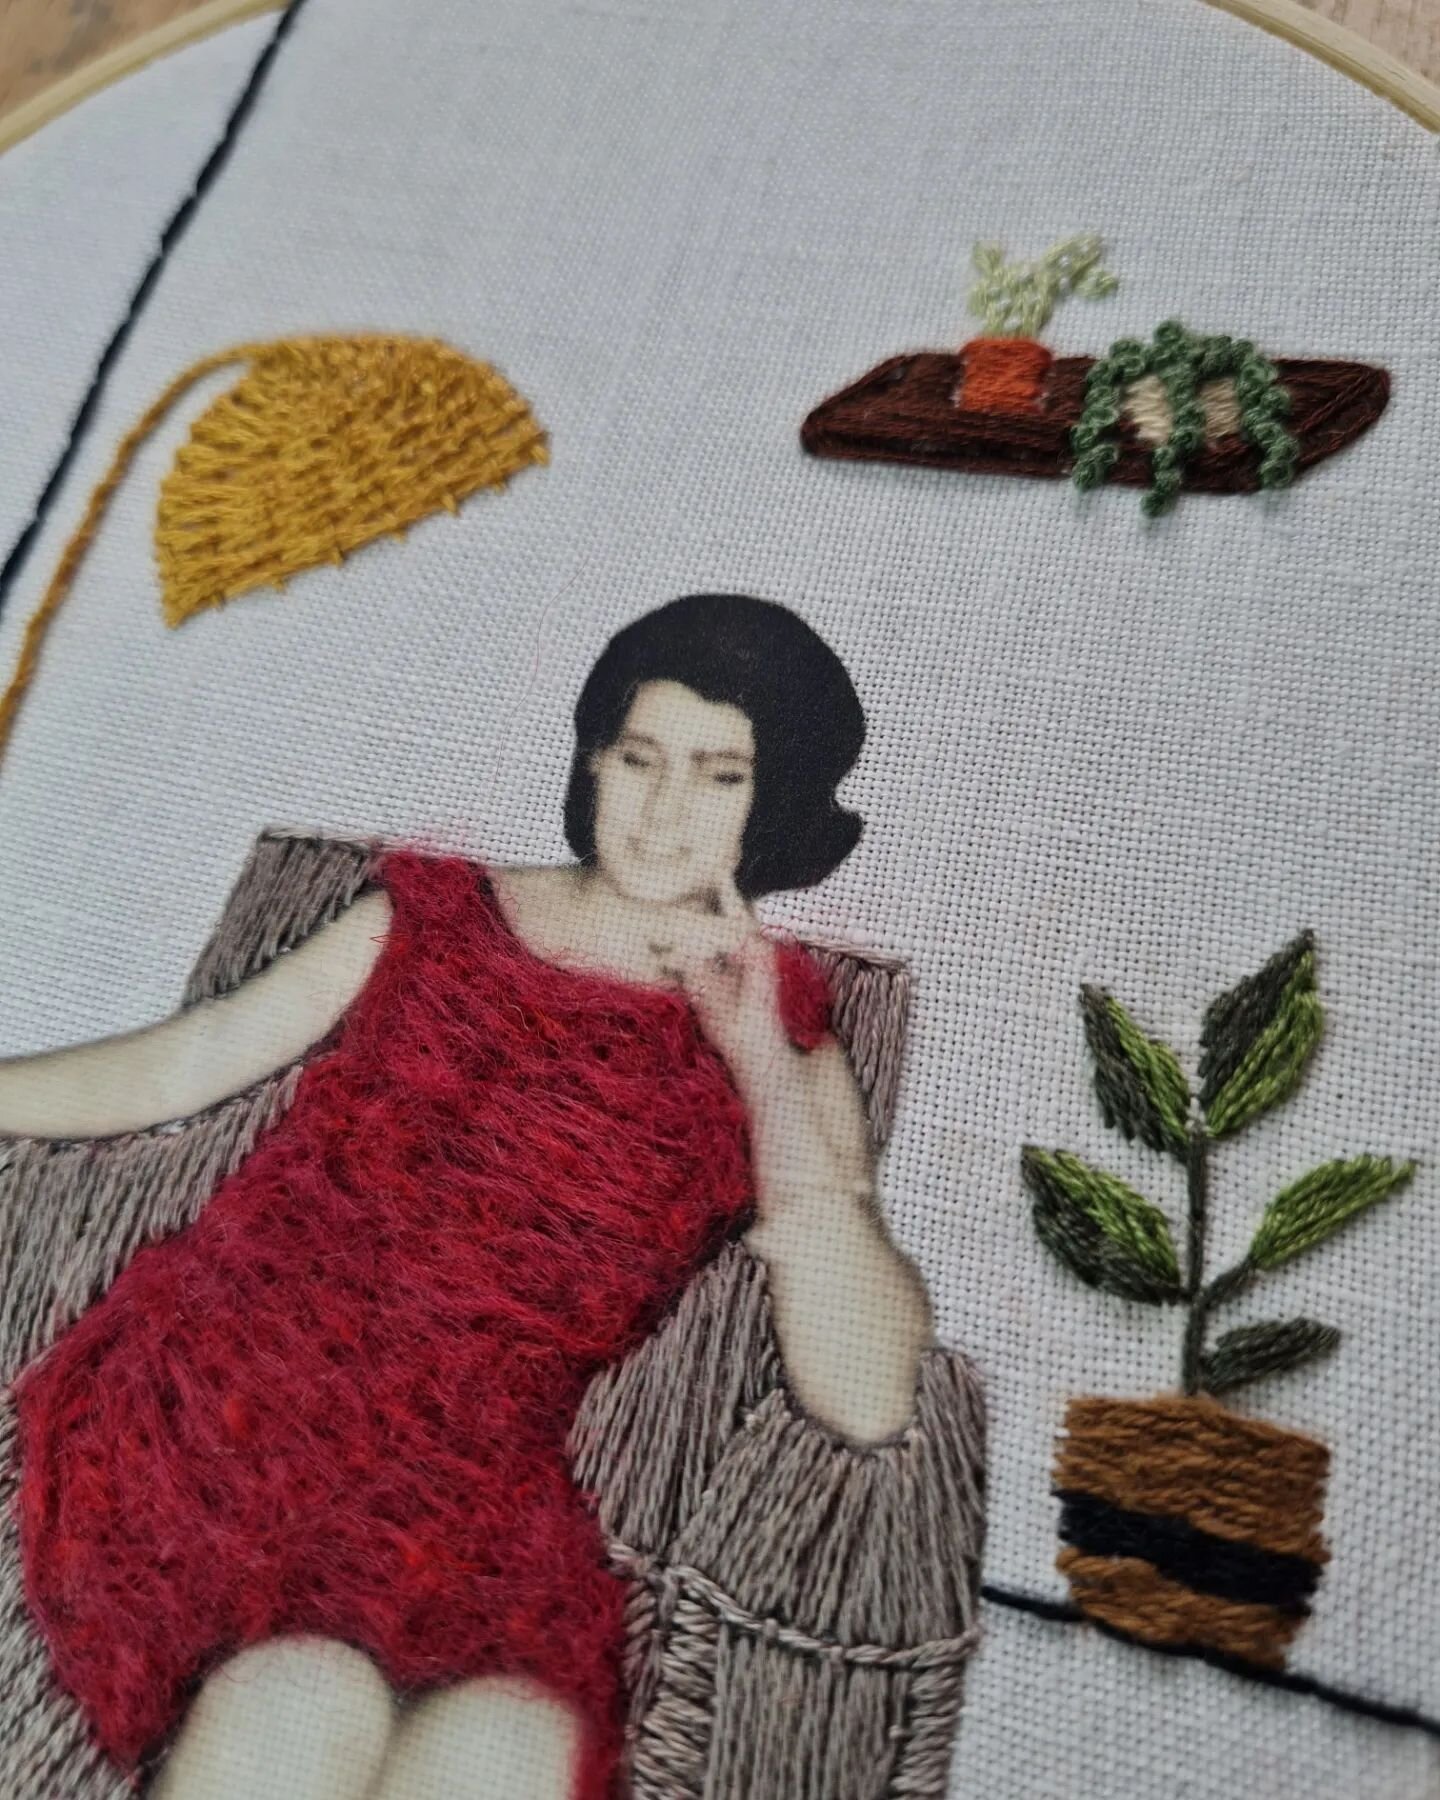 Finally I finished this new embroidery of my grandma. Since I saw this picture I loved the composition and gesture of my grandma. My grandfather was an amateur photographer and my grandmother was the perfect model ❤️&nbsp; I would embroider all his p